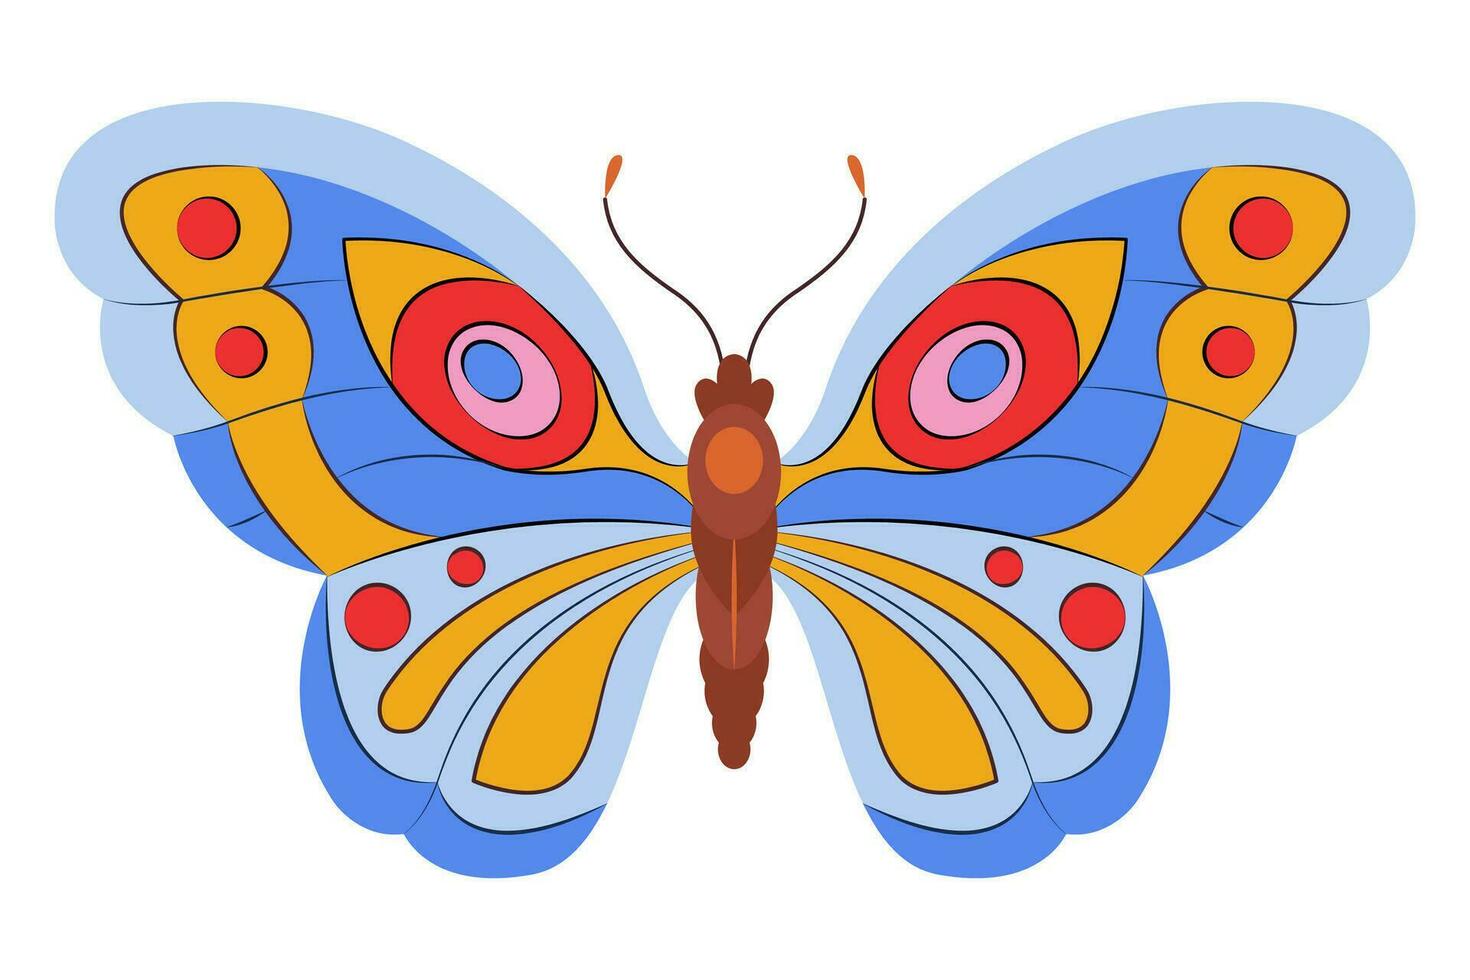 Colorful Butterfly icon logo isolated. Beautiful Butterfly illustration vector